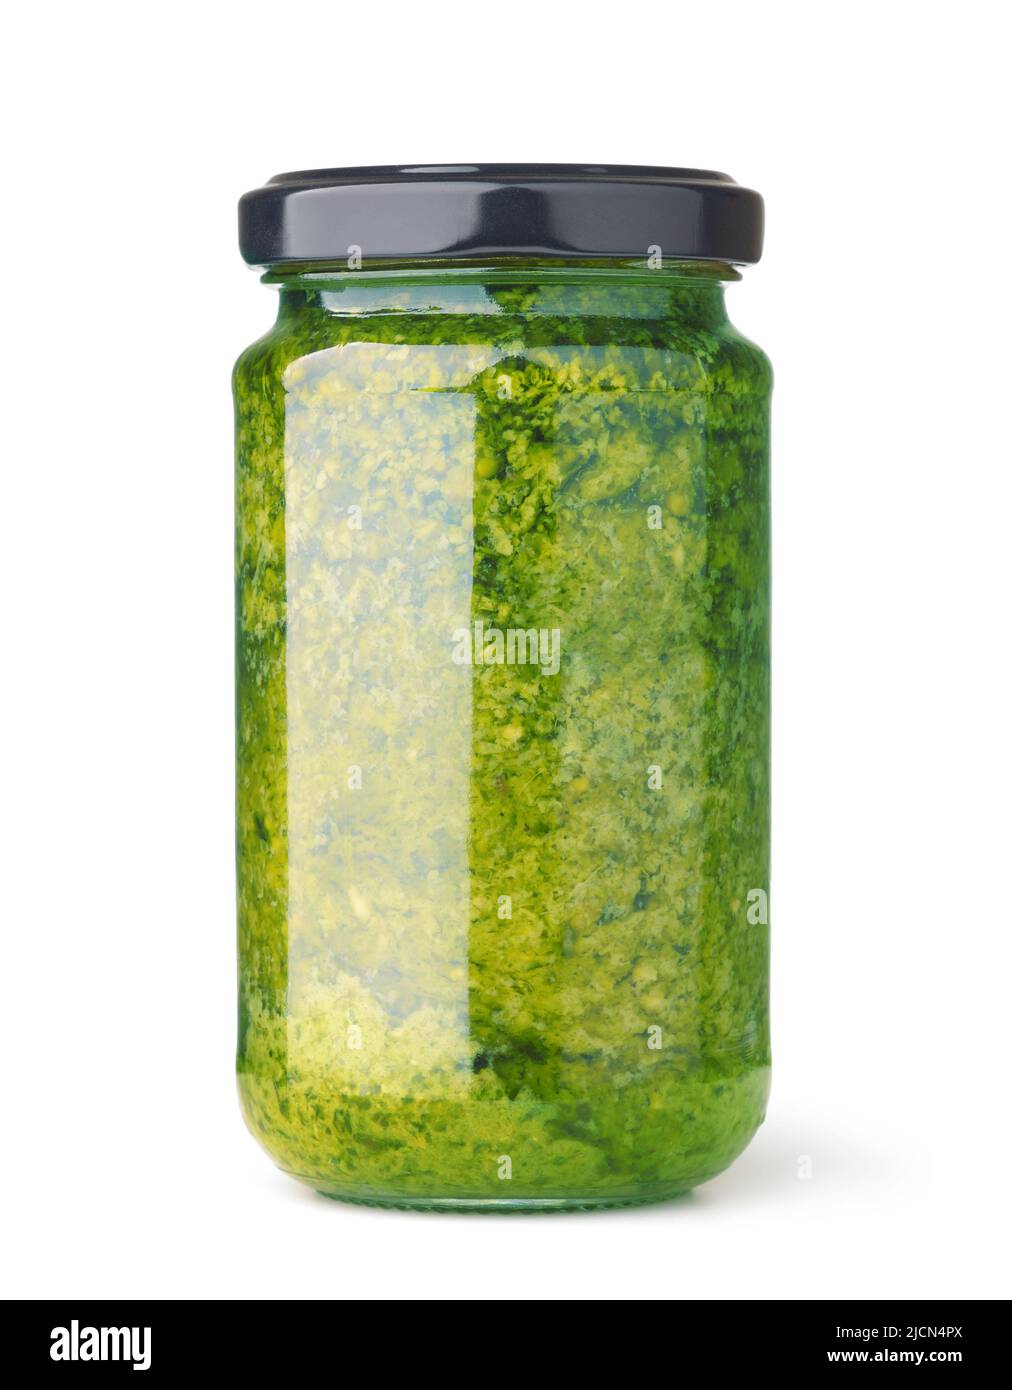 Glass unlabeled jar of green pesto sauce isolated on white Stock Photo